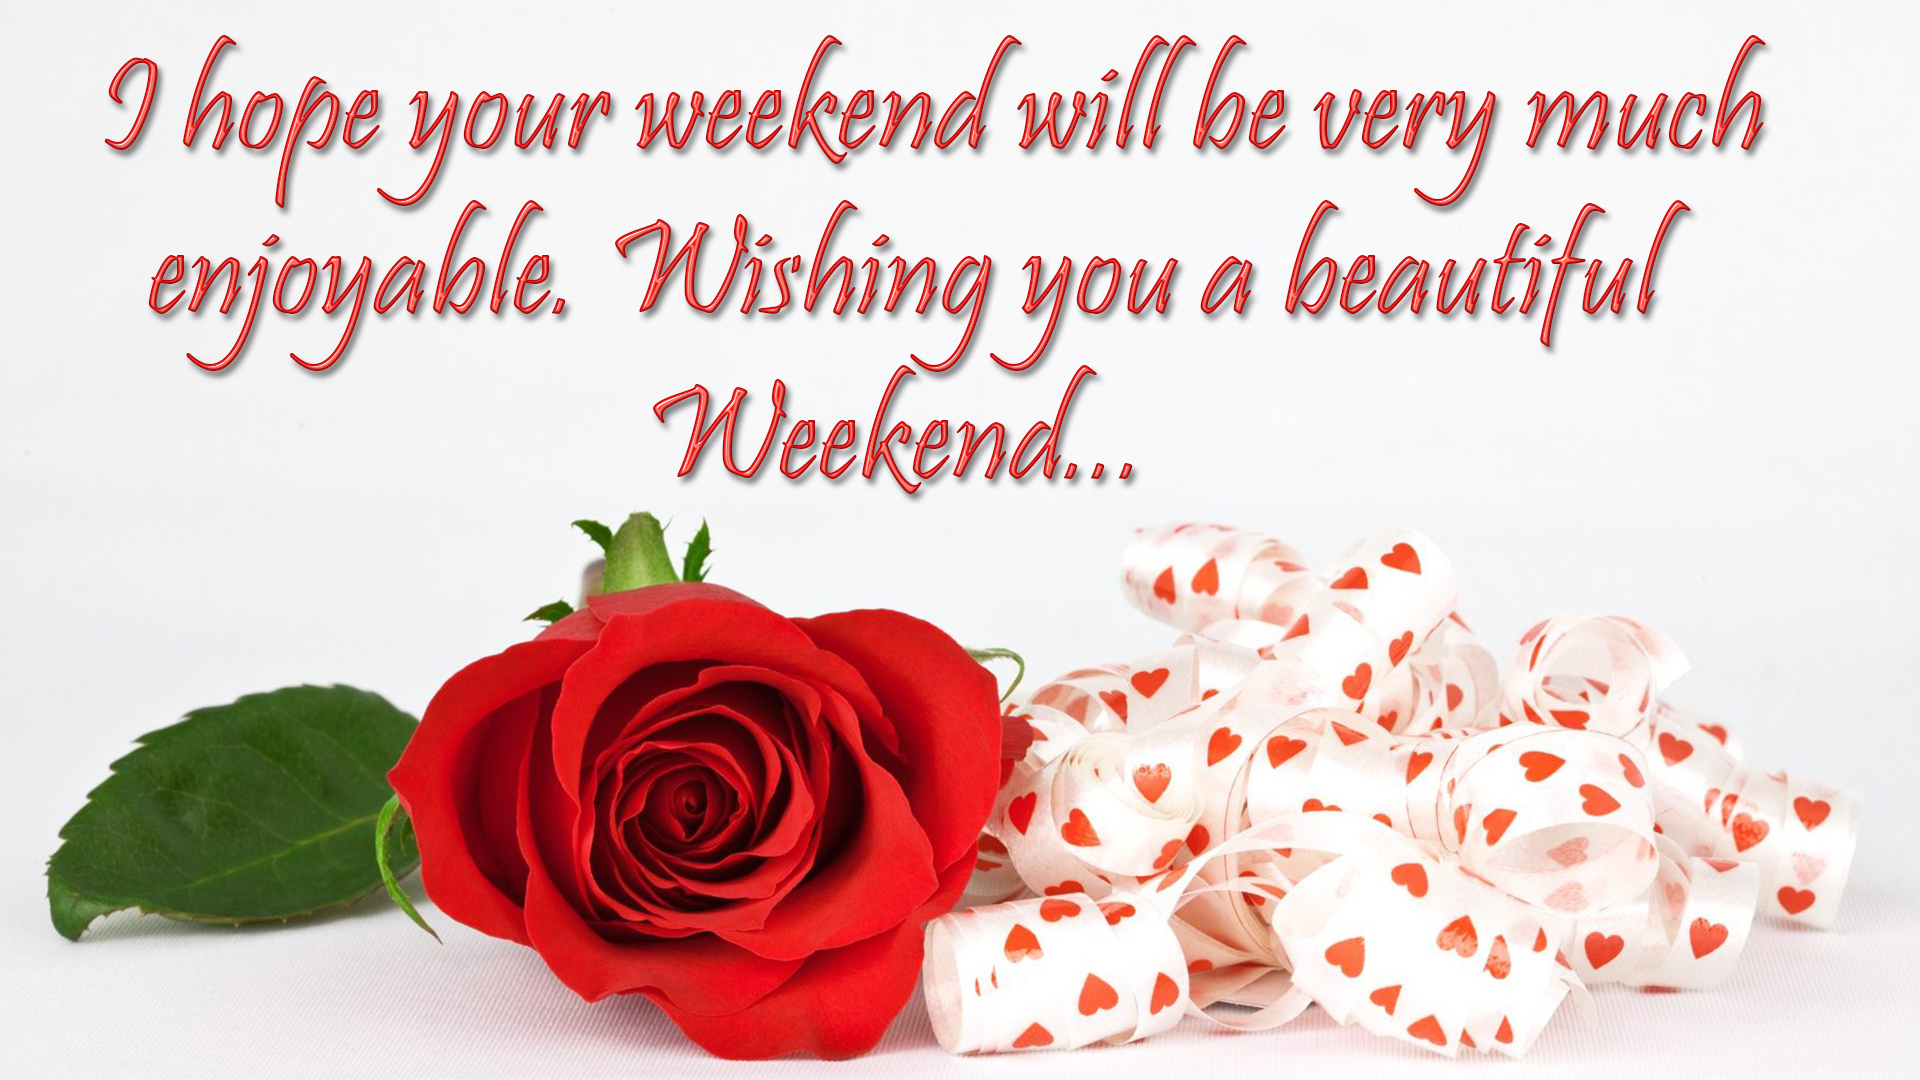 happy weekend wishes hd image